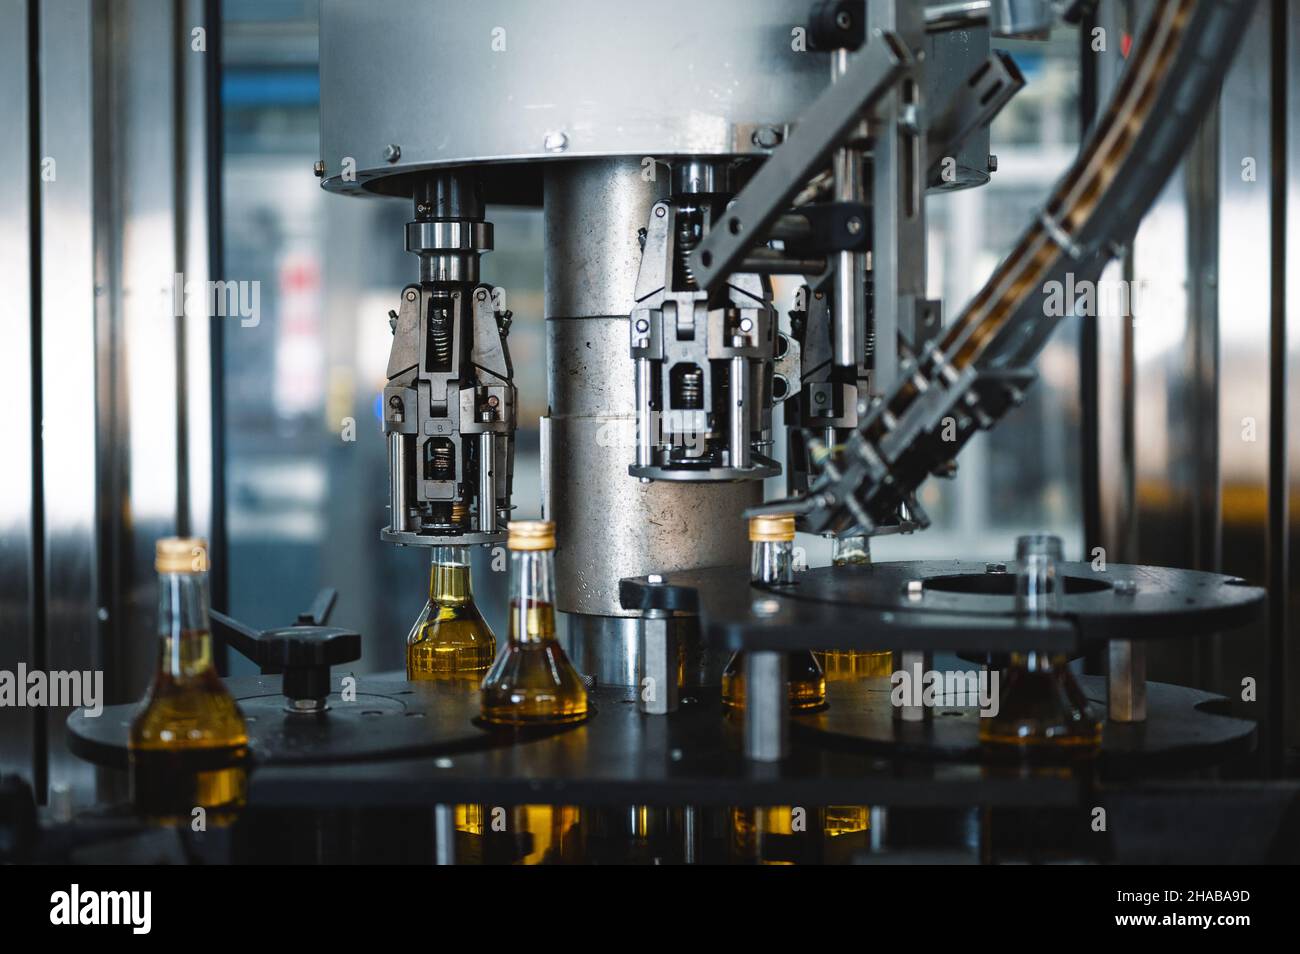 Machine tool puts caps on bottles of hard alcohol drink Stock Photo